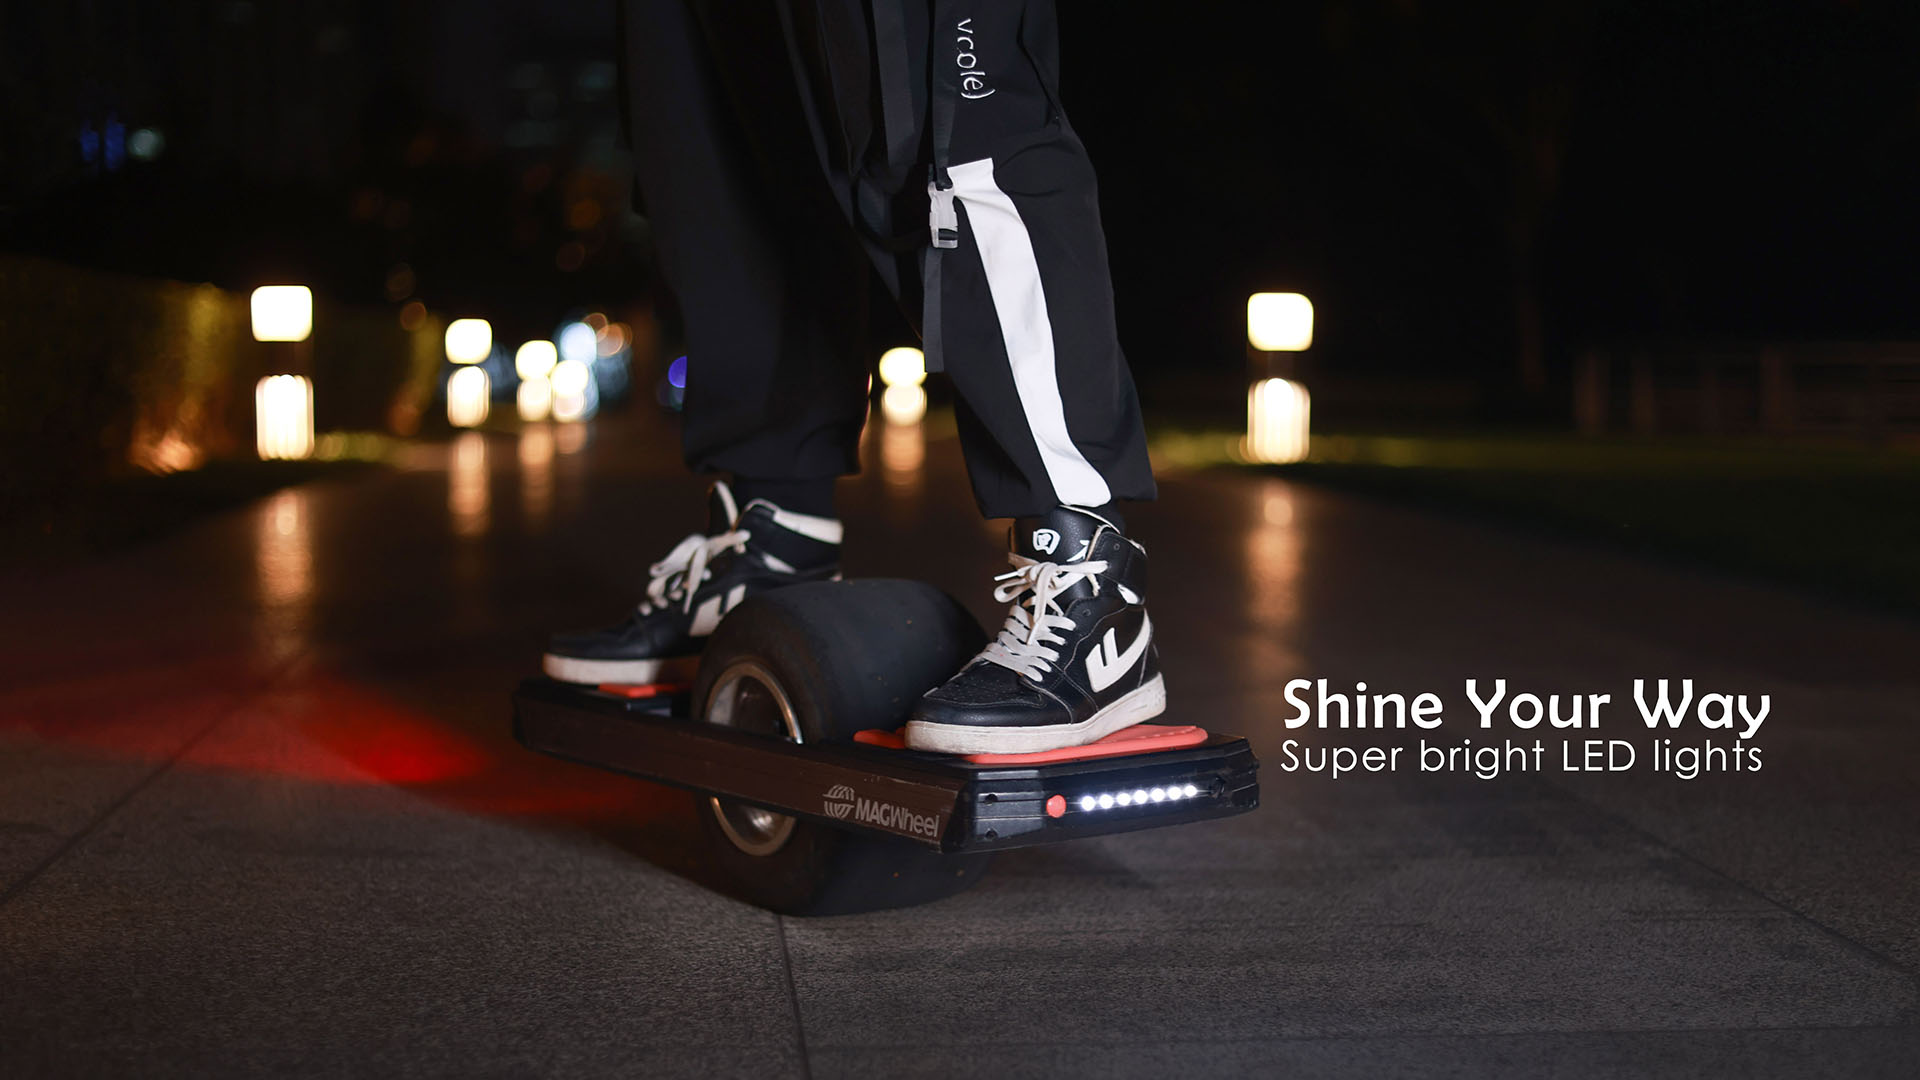 Shine-Your-Way-Super-bright-LED-lights